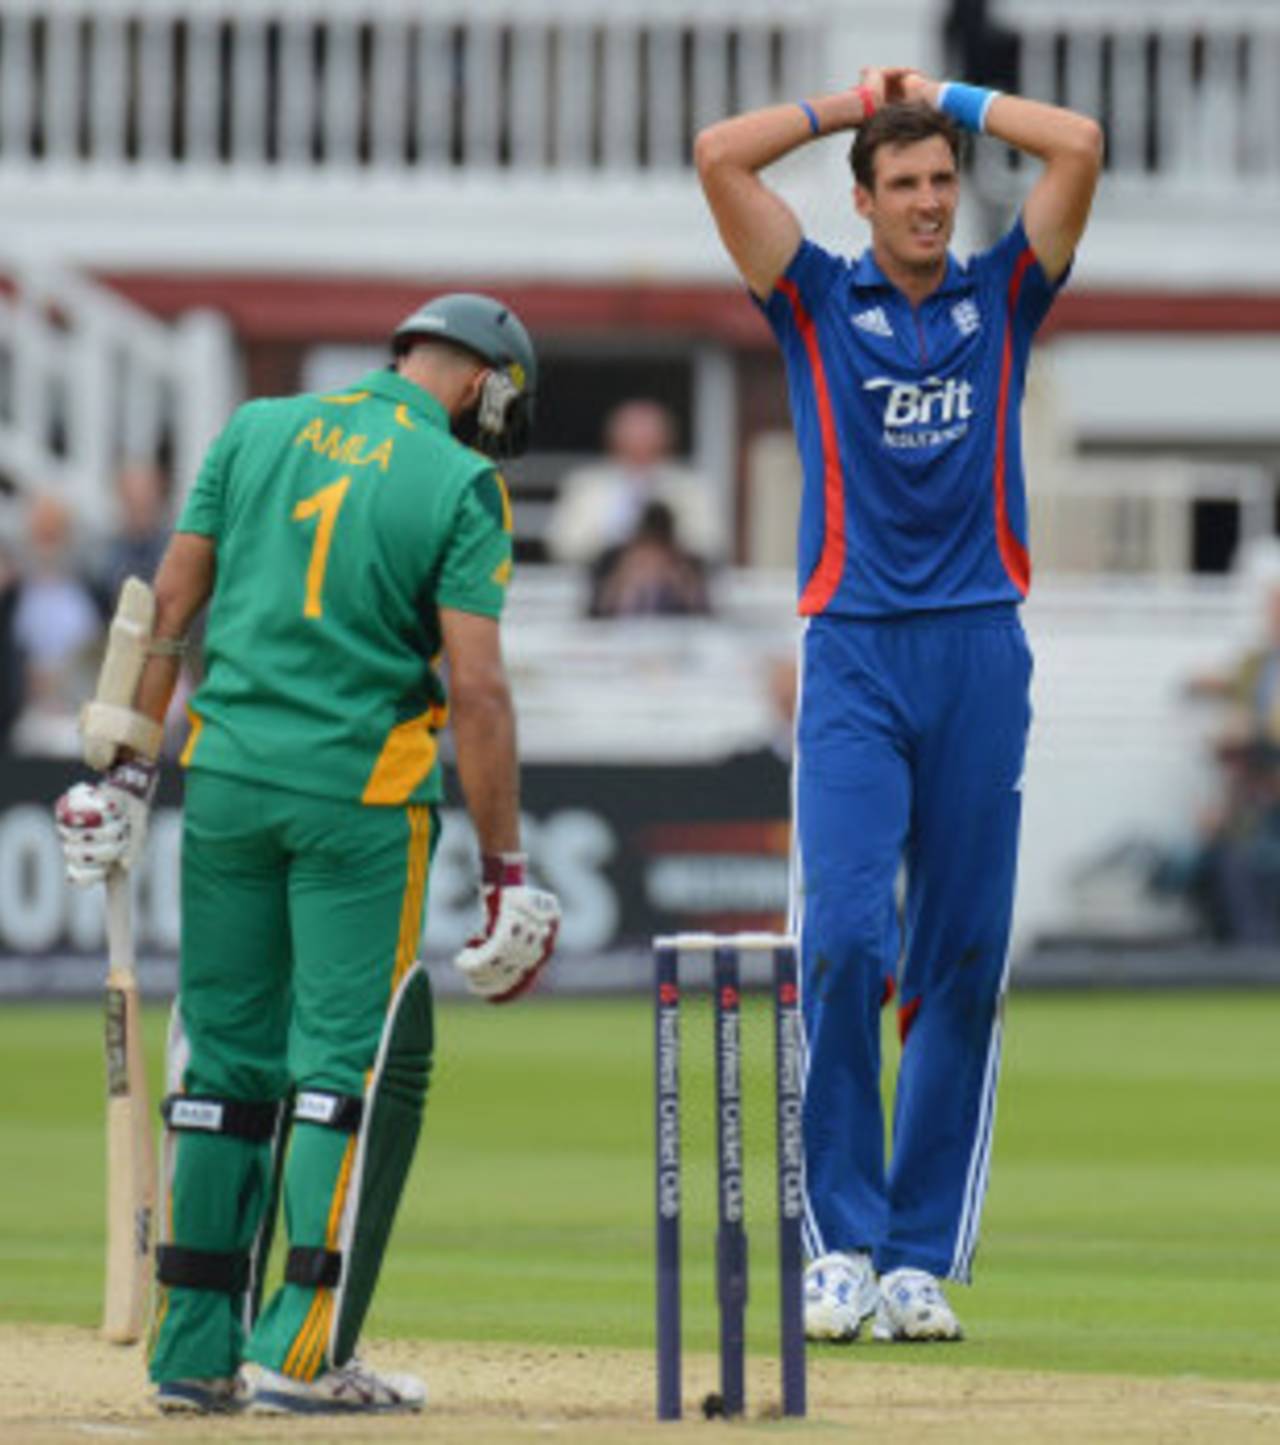 Steven Finn was twice denied wickets by England's poor slip catching at Lord's&nbsp;&nbsp;&bull;&nbsp;&nbsp;Getty Images